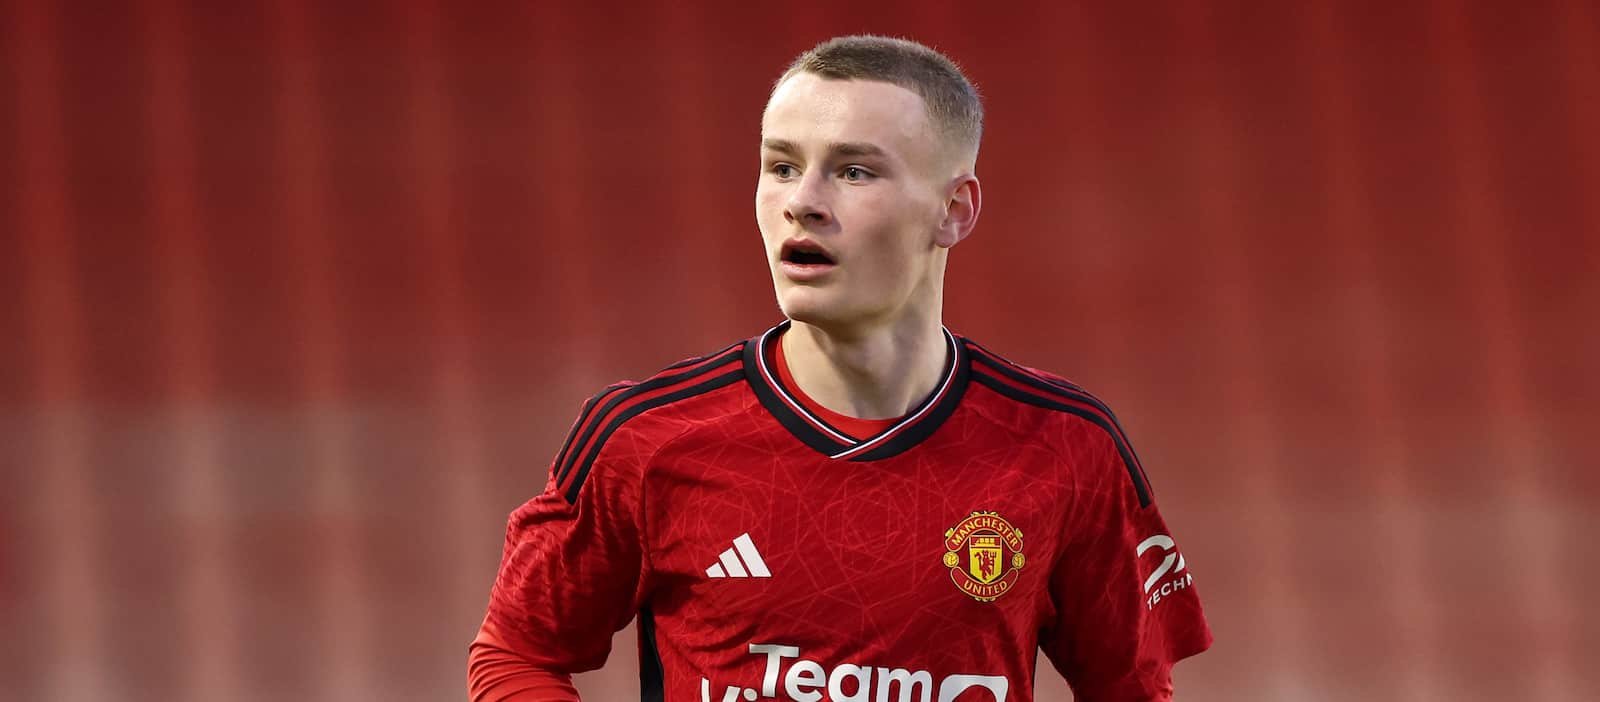 Academy Match Report: Manchester United u18s 3-0 Middlesbrough u18s – Man United News And Transfer News